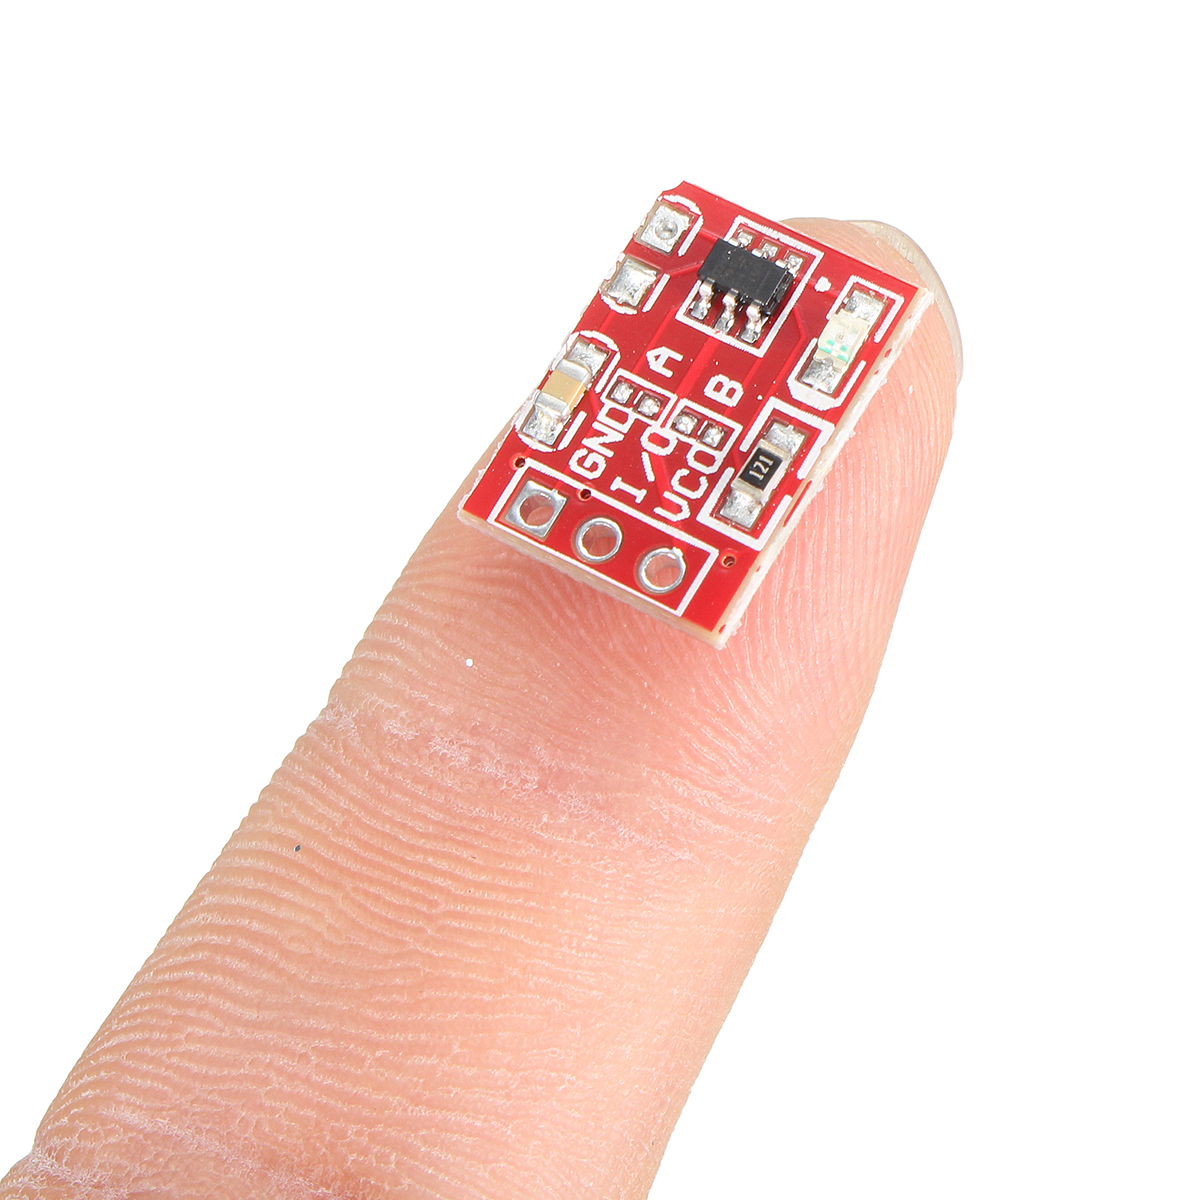 50pcs-25-55V-TTP223-Capacitive-Touch-Switch-Button-Self-Lock-Module-1338051